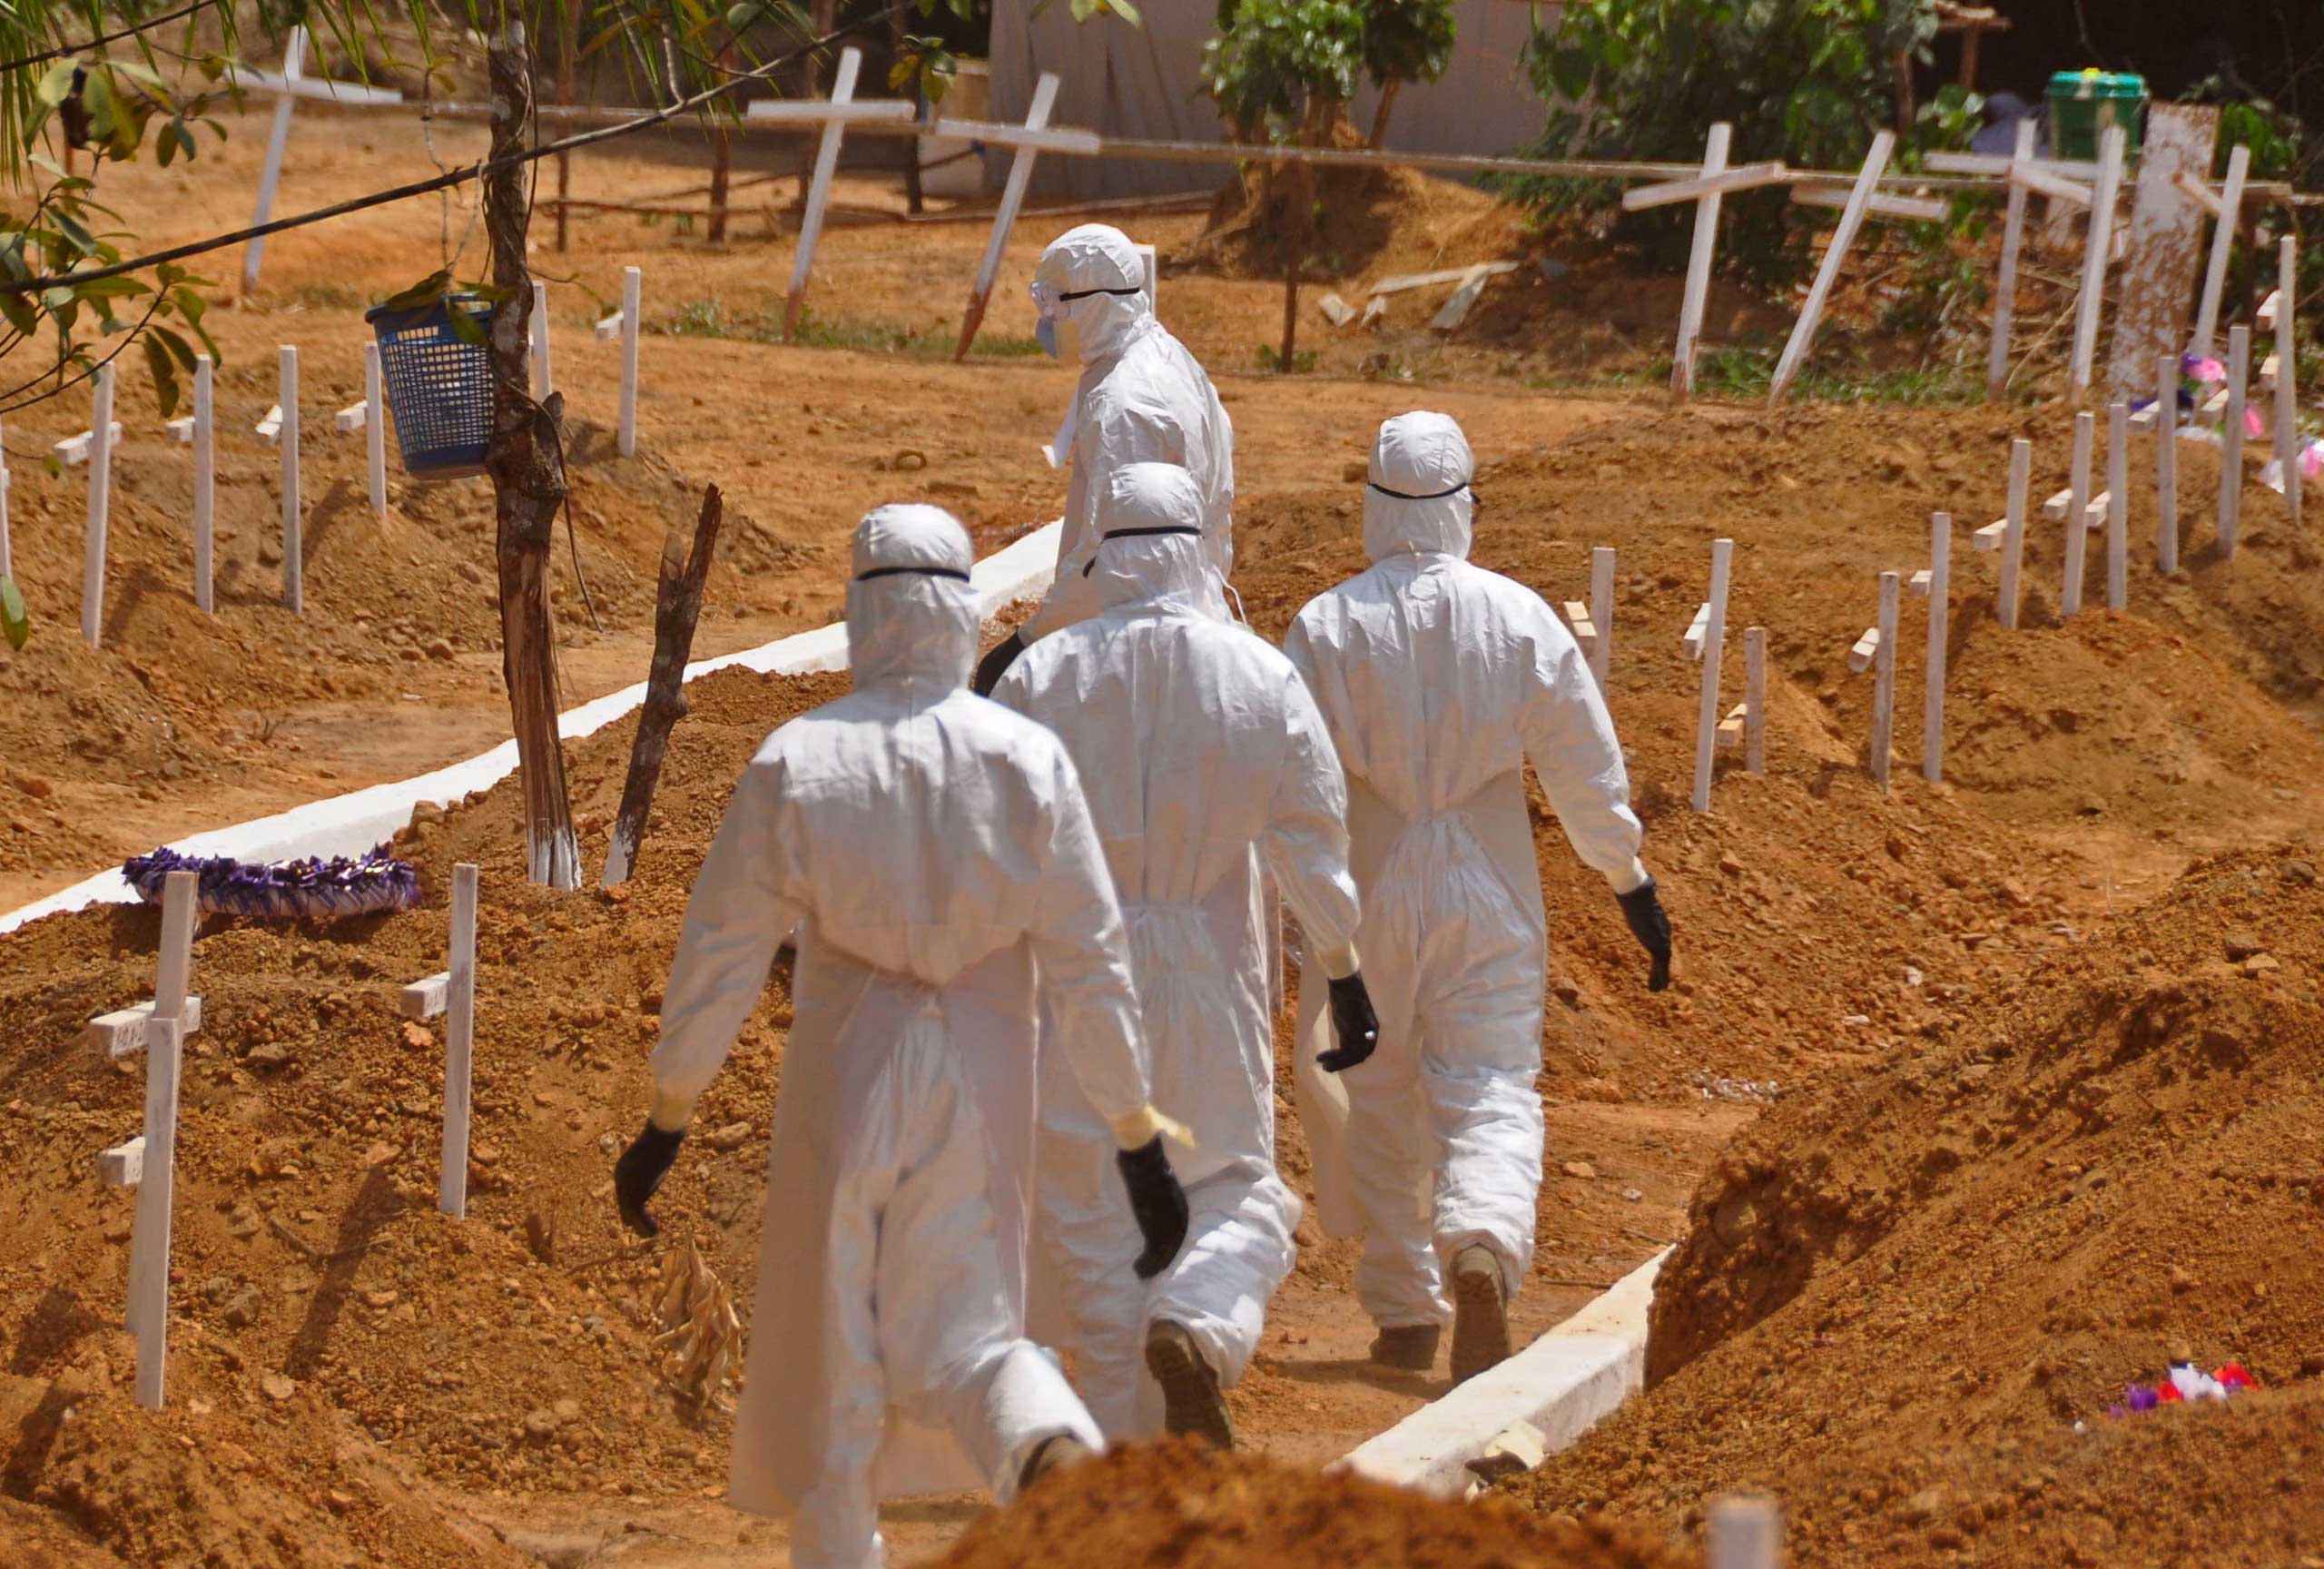 Health workers walk inside a new graveyard for Ebola victims, on the outskirts of Monrovia, Liberia on March 11, 2015.